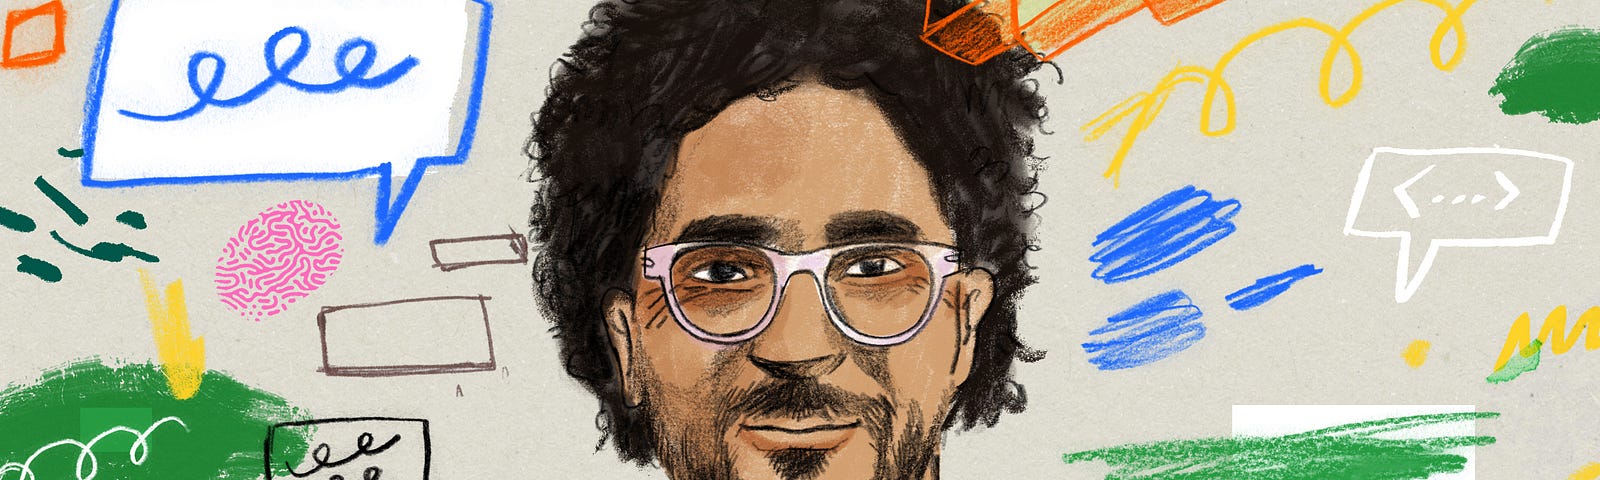 Illustrated portrait of Mark Díaz, an Afrolatino man in his early 30’s with medium-length black curly hair and a beard, wearing pink translucent glasses.